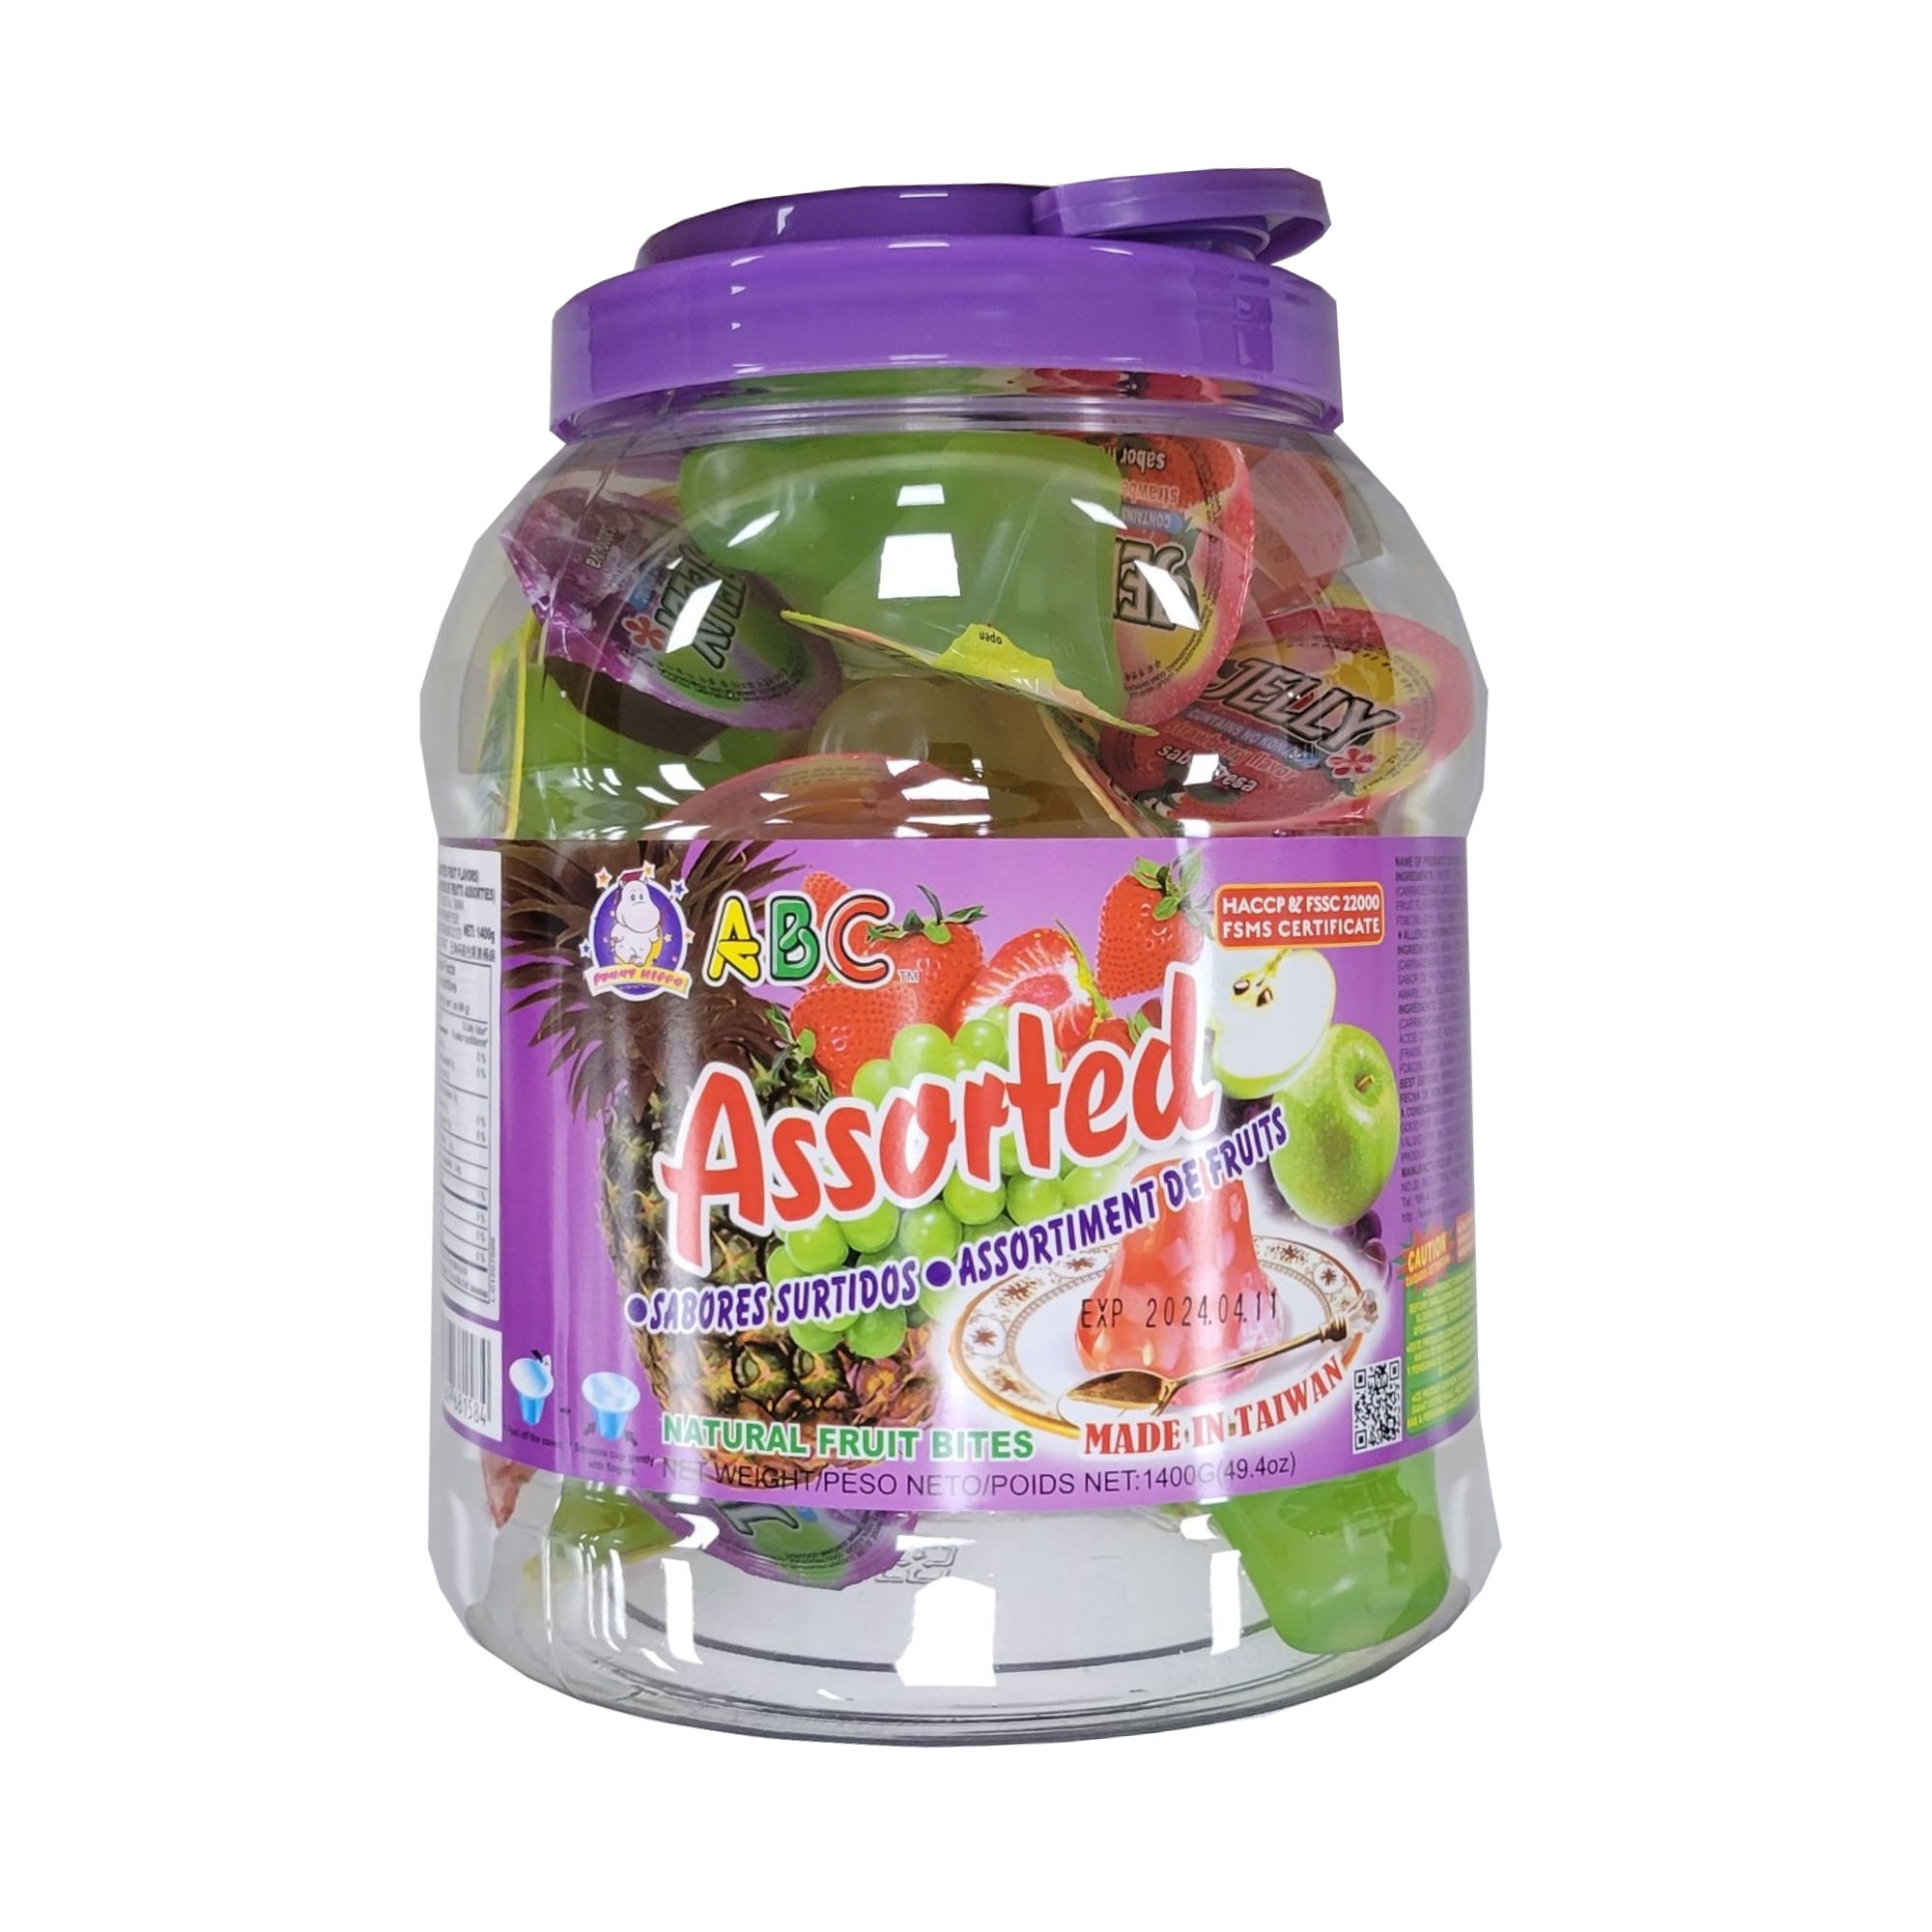 ABC ASSORTED COCONUT JELLY PET SN110744